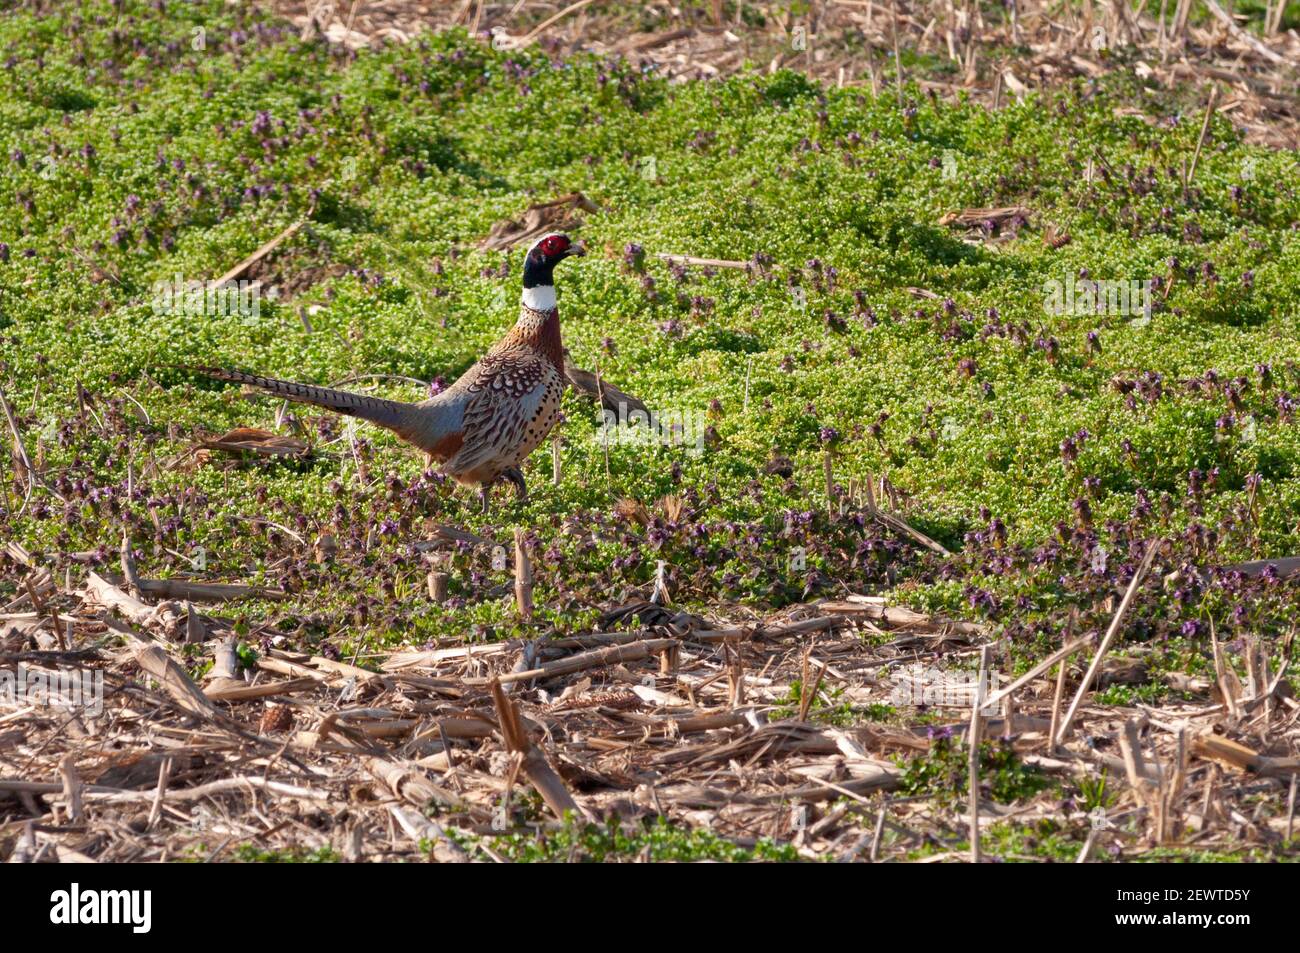 Italy, Lombardy, Countryside near Crema, Male Common Pheasant (Phasianus colchicus) Stock Photo